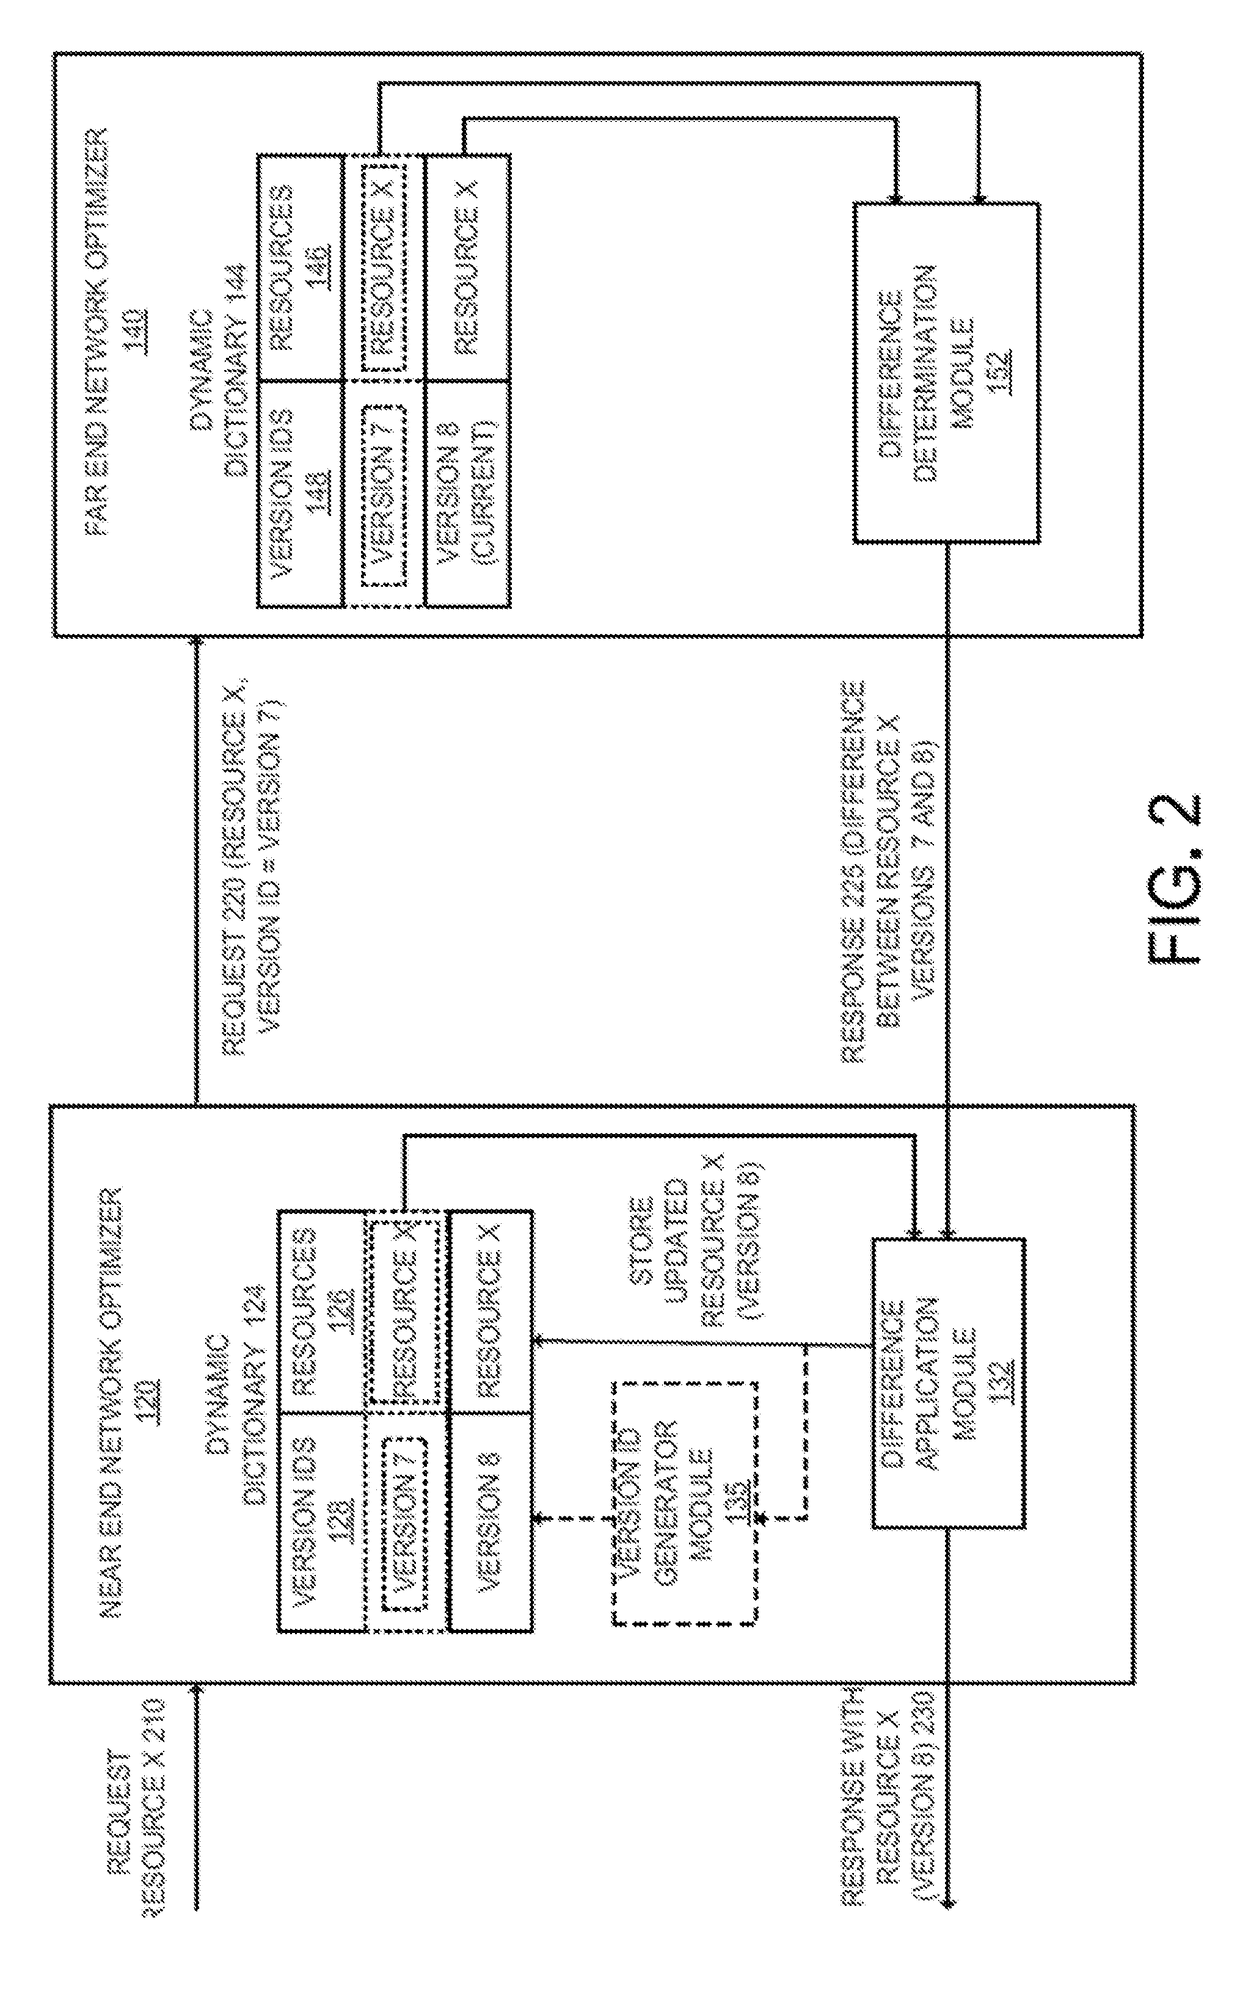 Method and apparatus for reducing network resource transmission size using delta compression